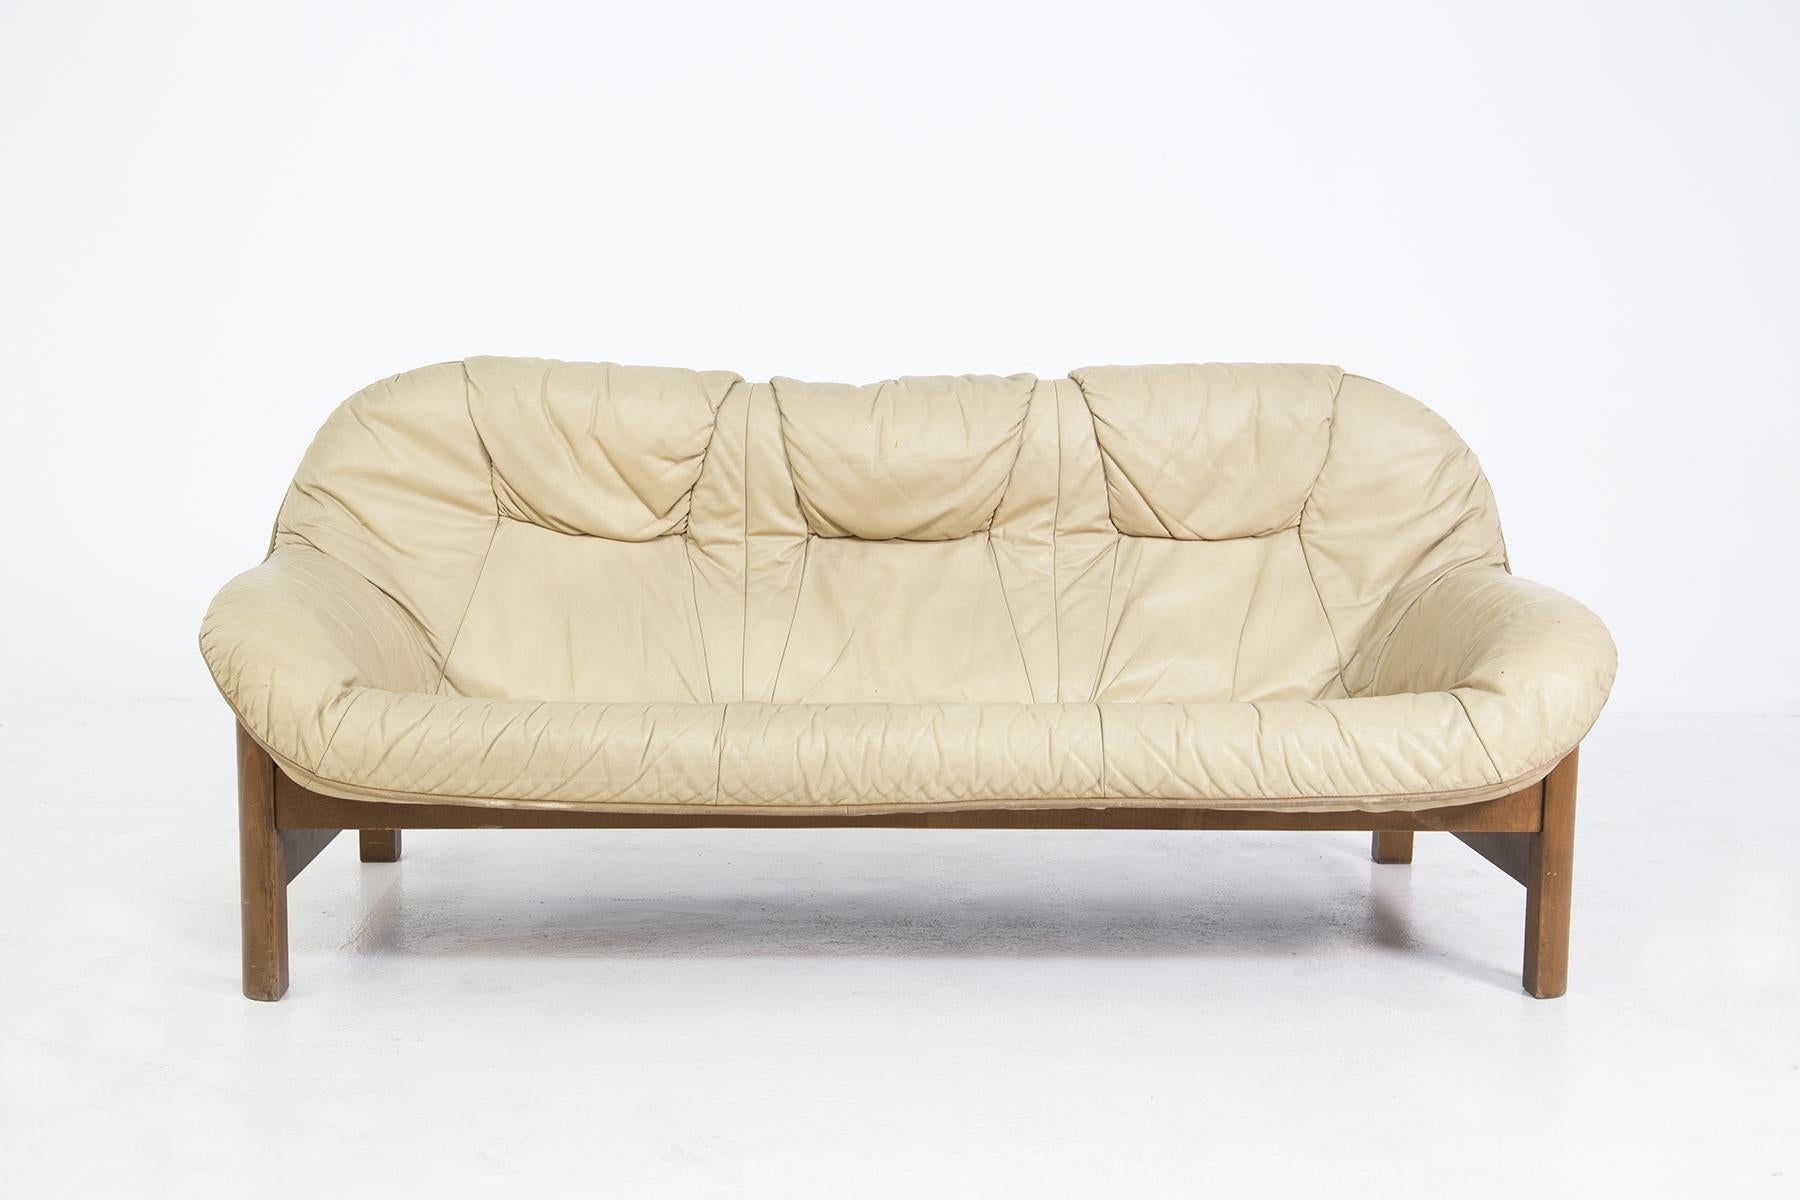 Vintage Italian-made sofa from the 1960s.
The sofa is made with a wooden frame and with a one-piece cushion that wraps around and covers both the seat and the back in beige leather.
The leather seat is so comfortable that it also wraps around the